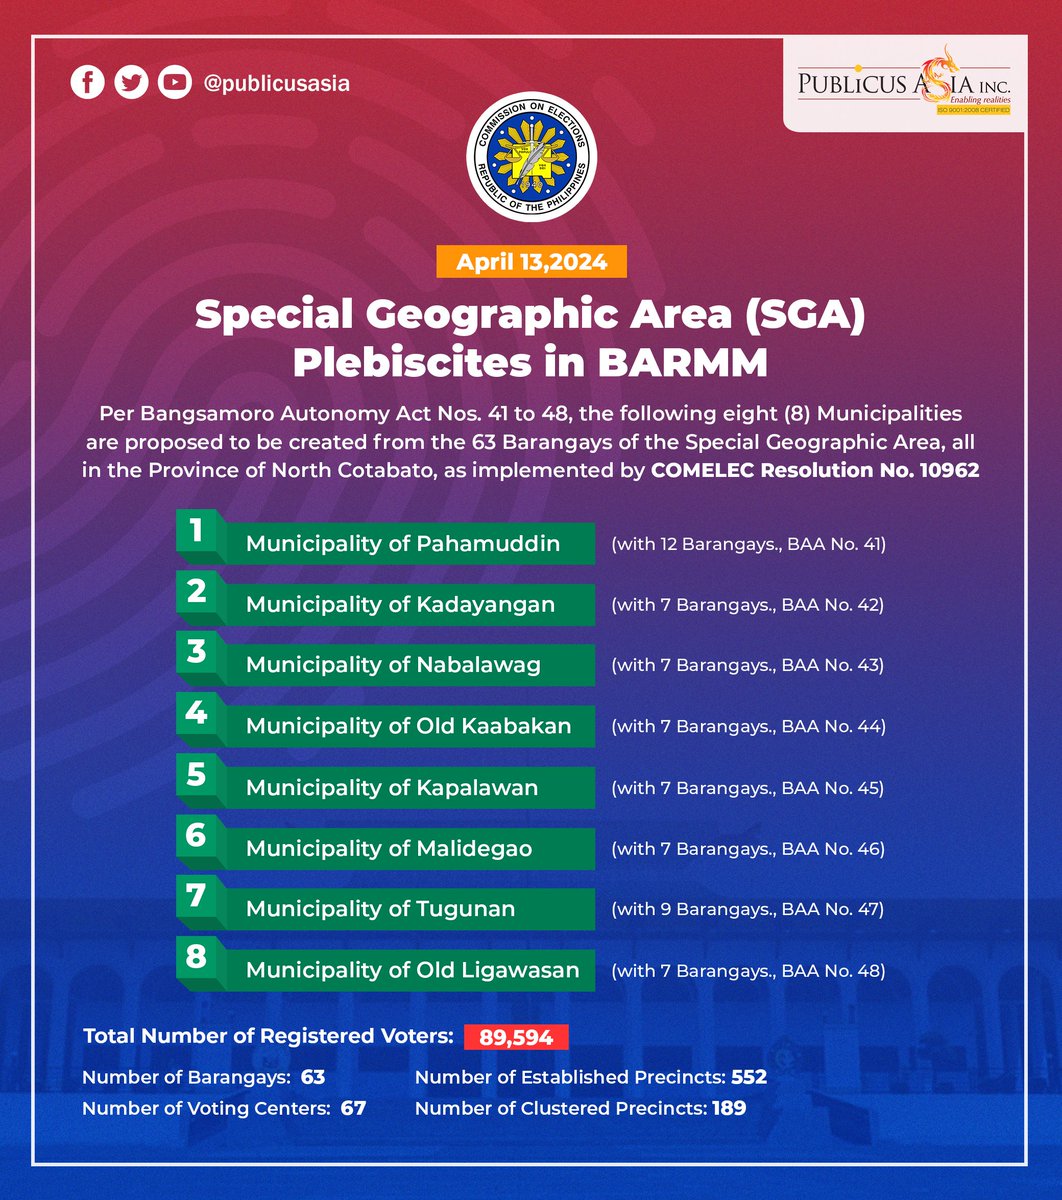 Per Bangsamoro Autonomy Act Nos. 41 to 48, eight (8) municipalities are proposed to be created from the 63 barangays of the Special Geographic Area, all in the Province of North Cotabato, as implemented by COMELEC Resolution No. 10962.

Read more: comelec.gov.ph/php-tpls-attac…